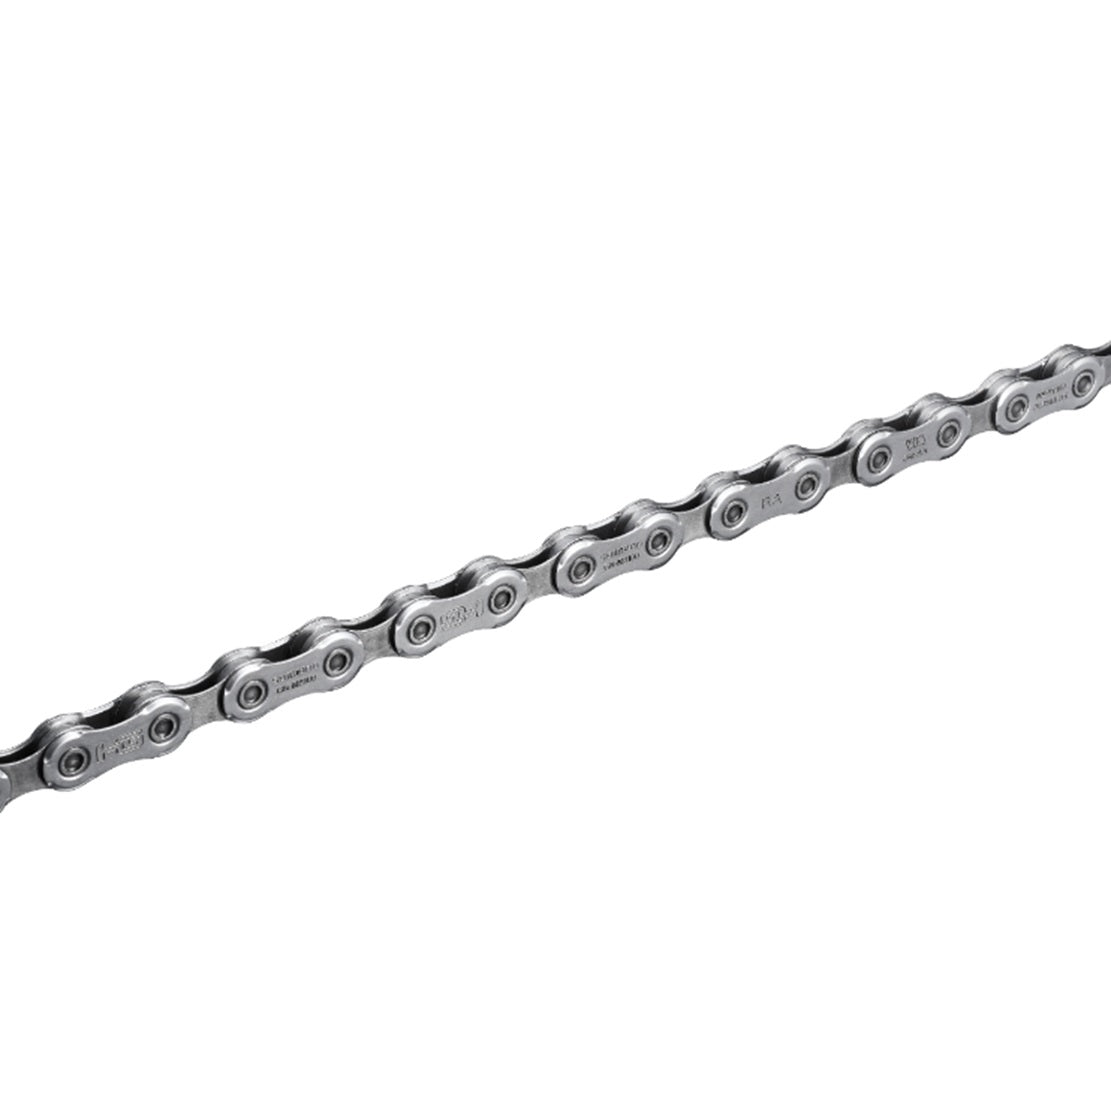 Shimano Deore XT 12 Speed Bicycle Chain